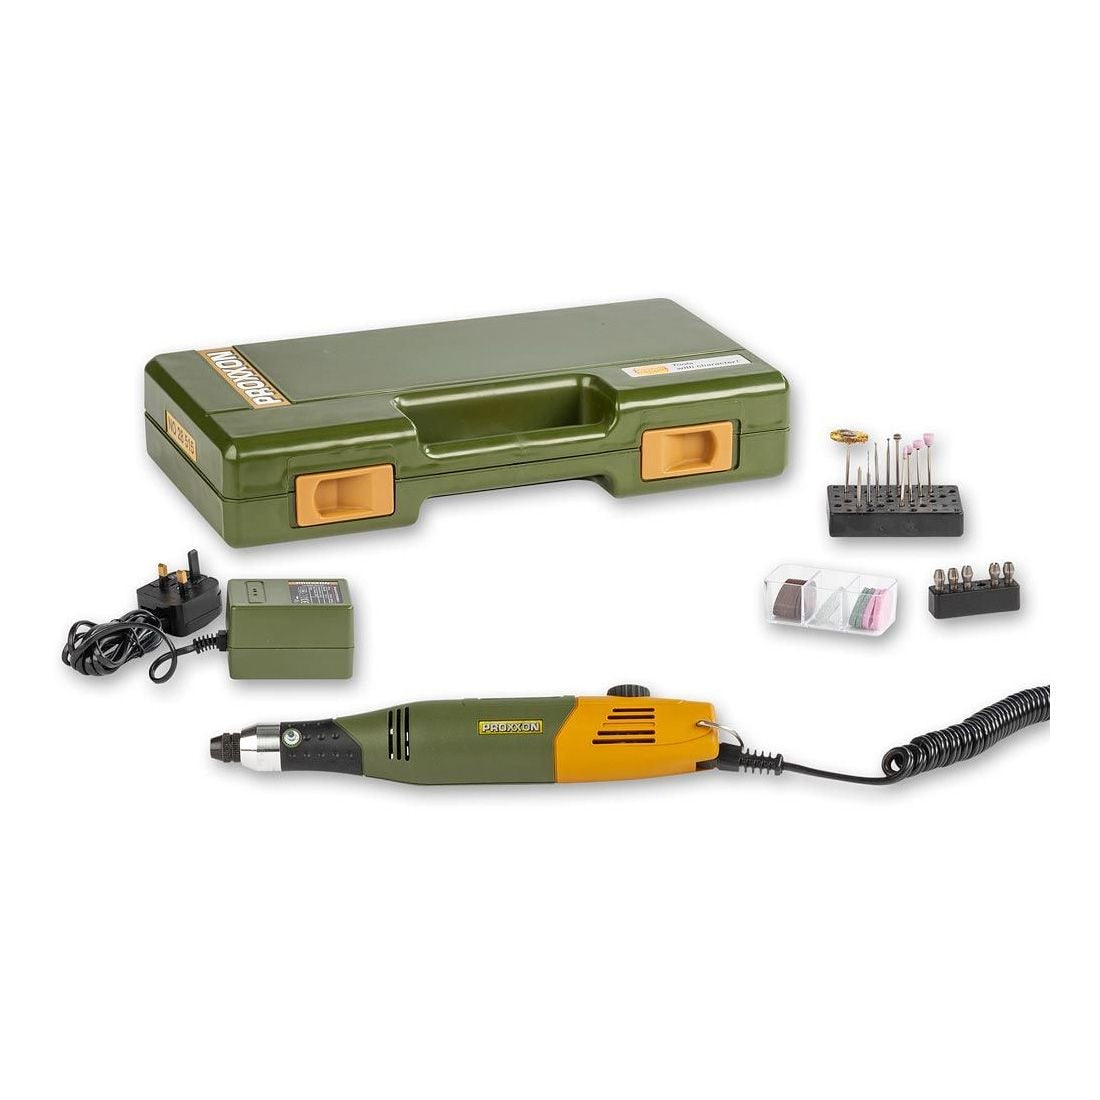 image showing the Proxxon Micromot 60/E Starter Set with the 12v transformer with fitted mains 240v plug. A carrying storage case, multi tool and a set of bits